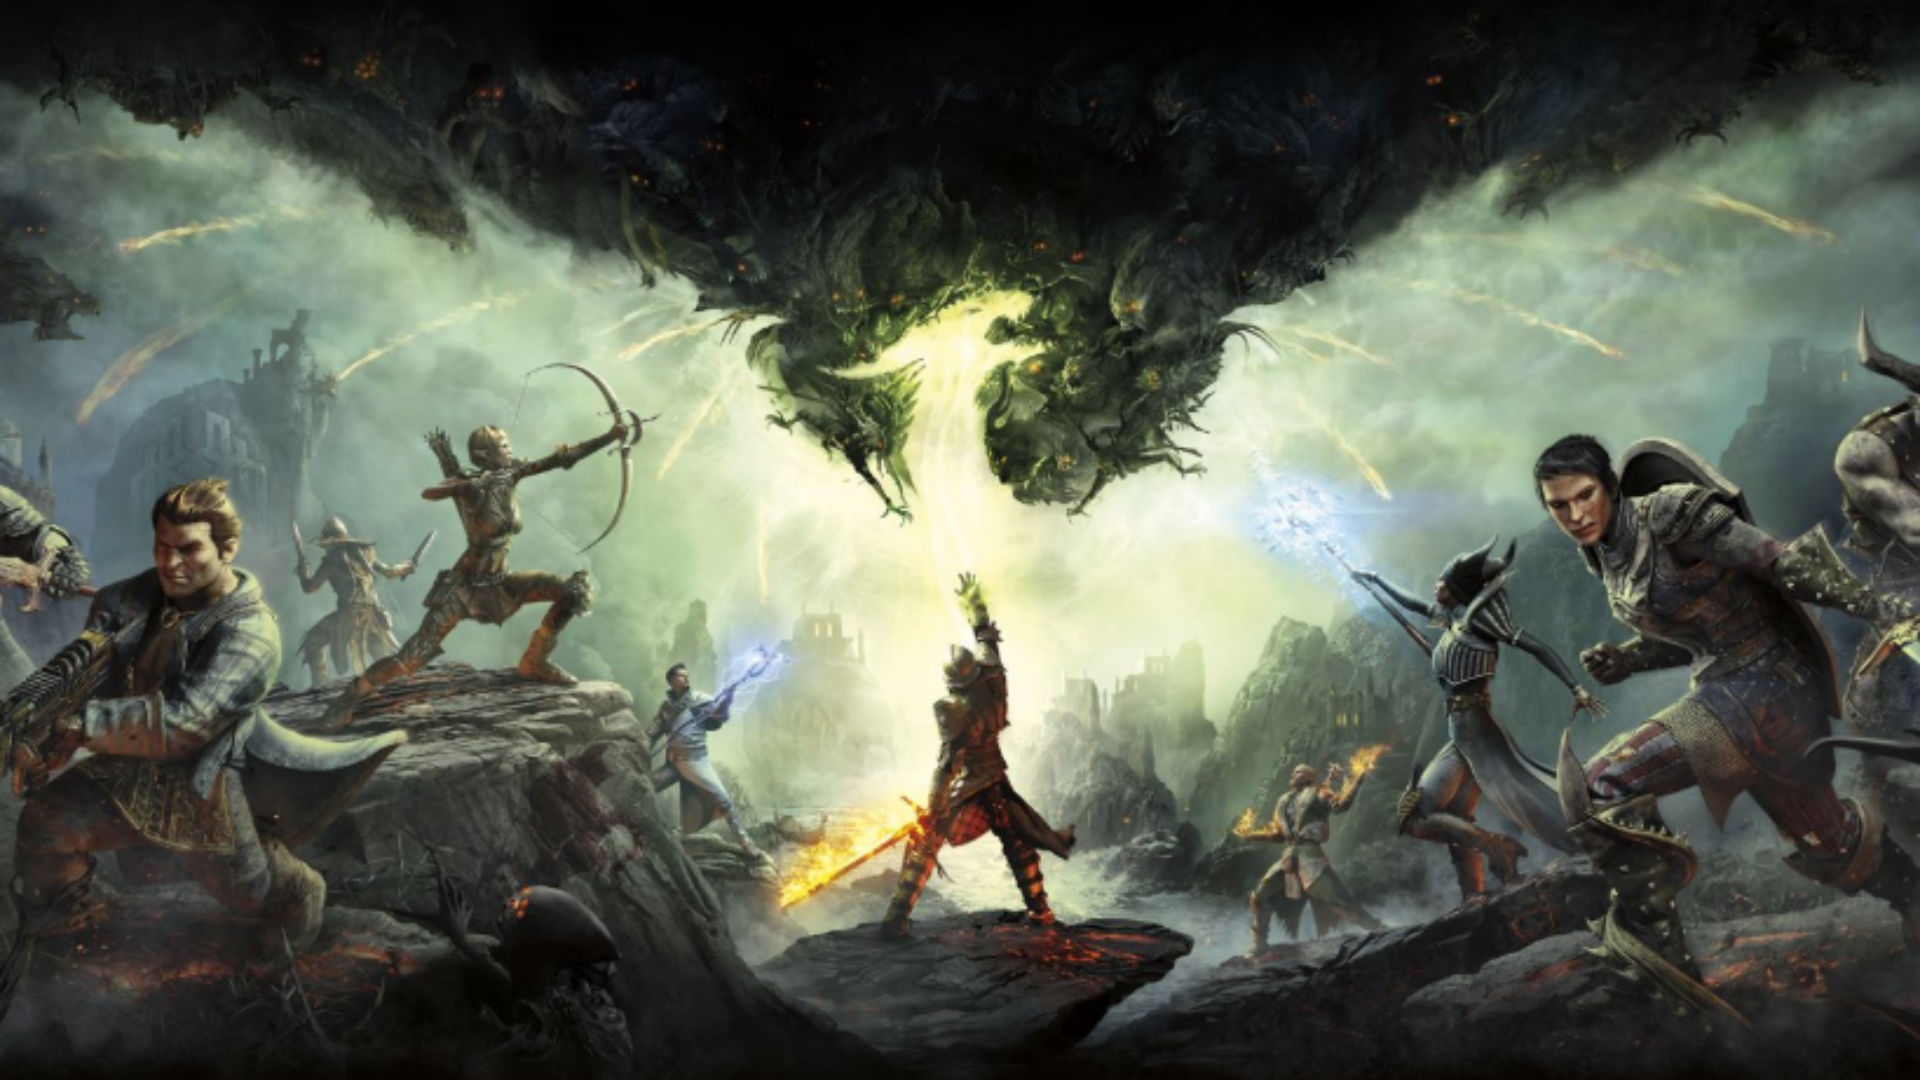 Next Dragon Age Wallpapers